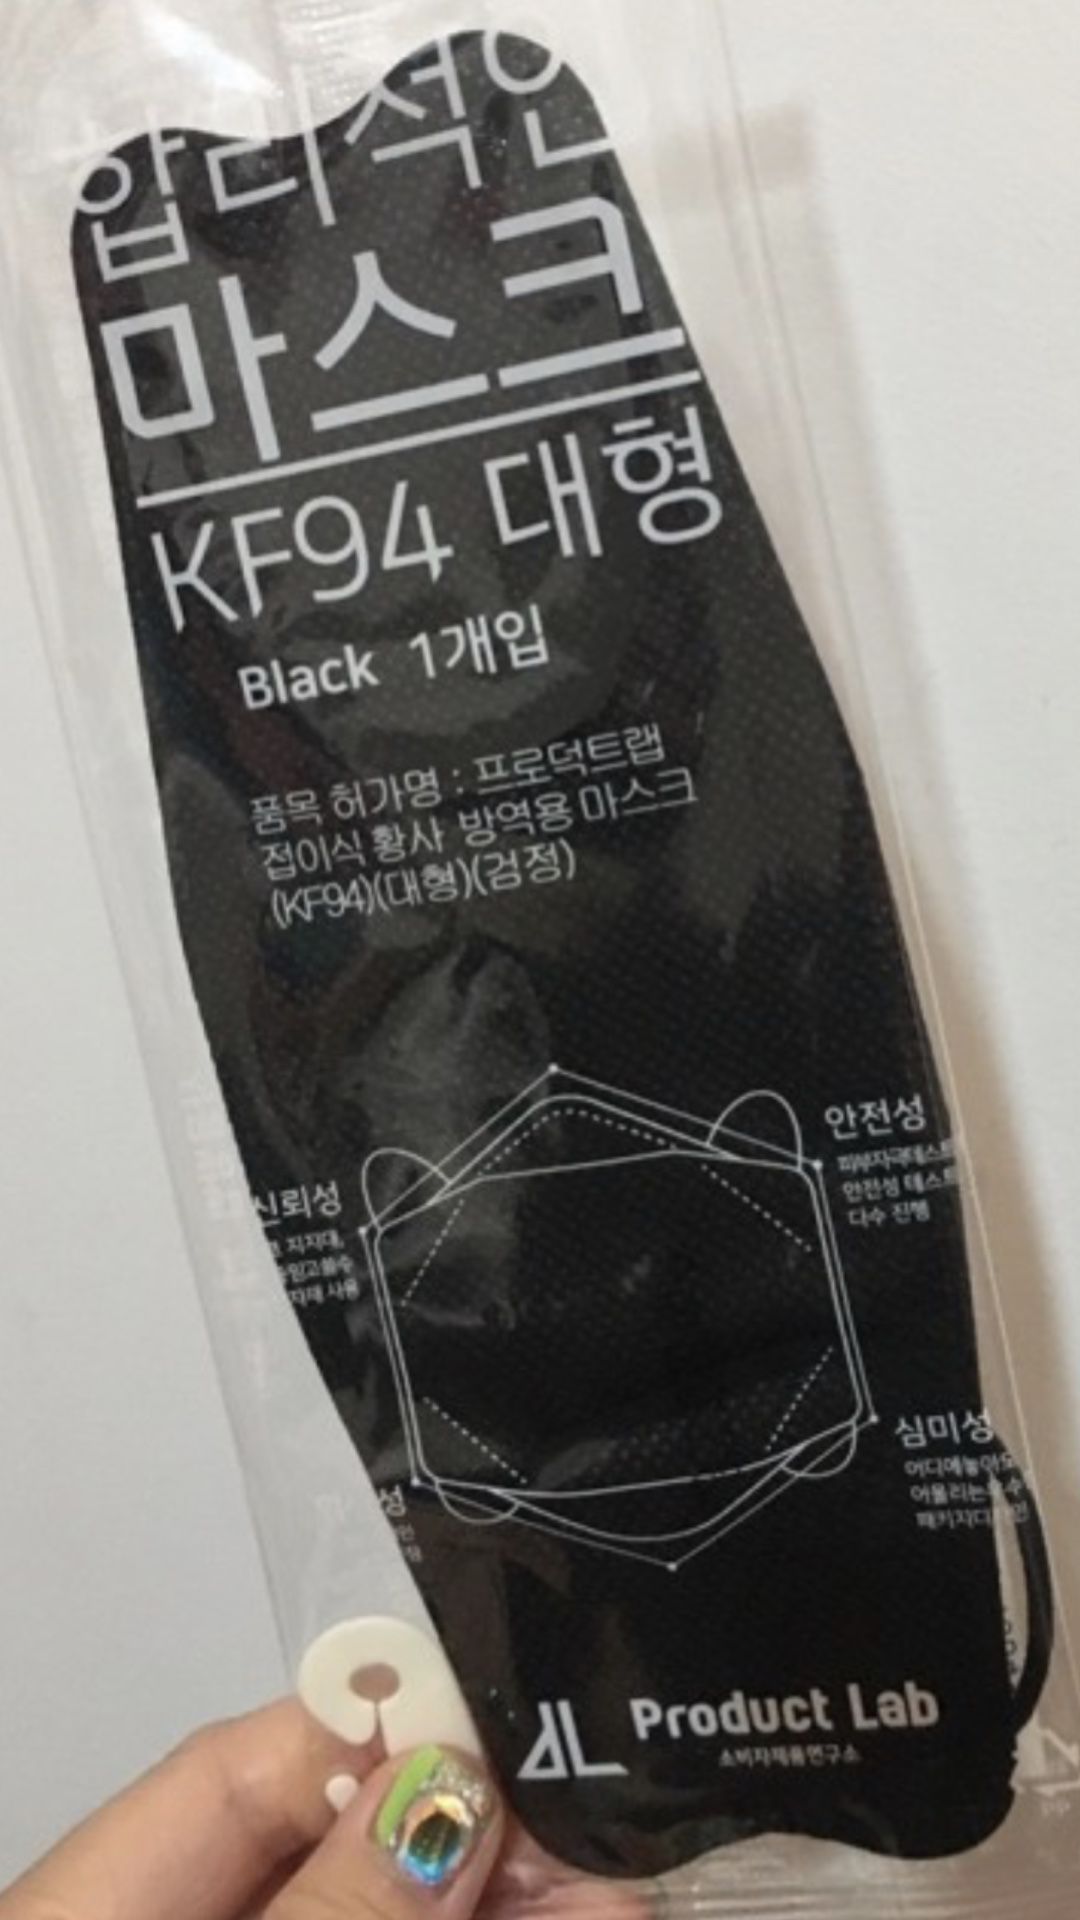 NEW KF94 BLACK face masks now in stock